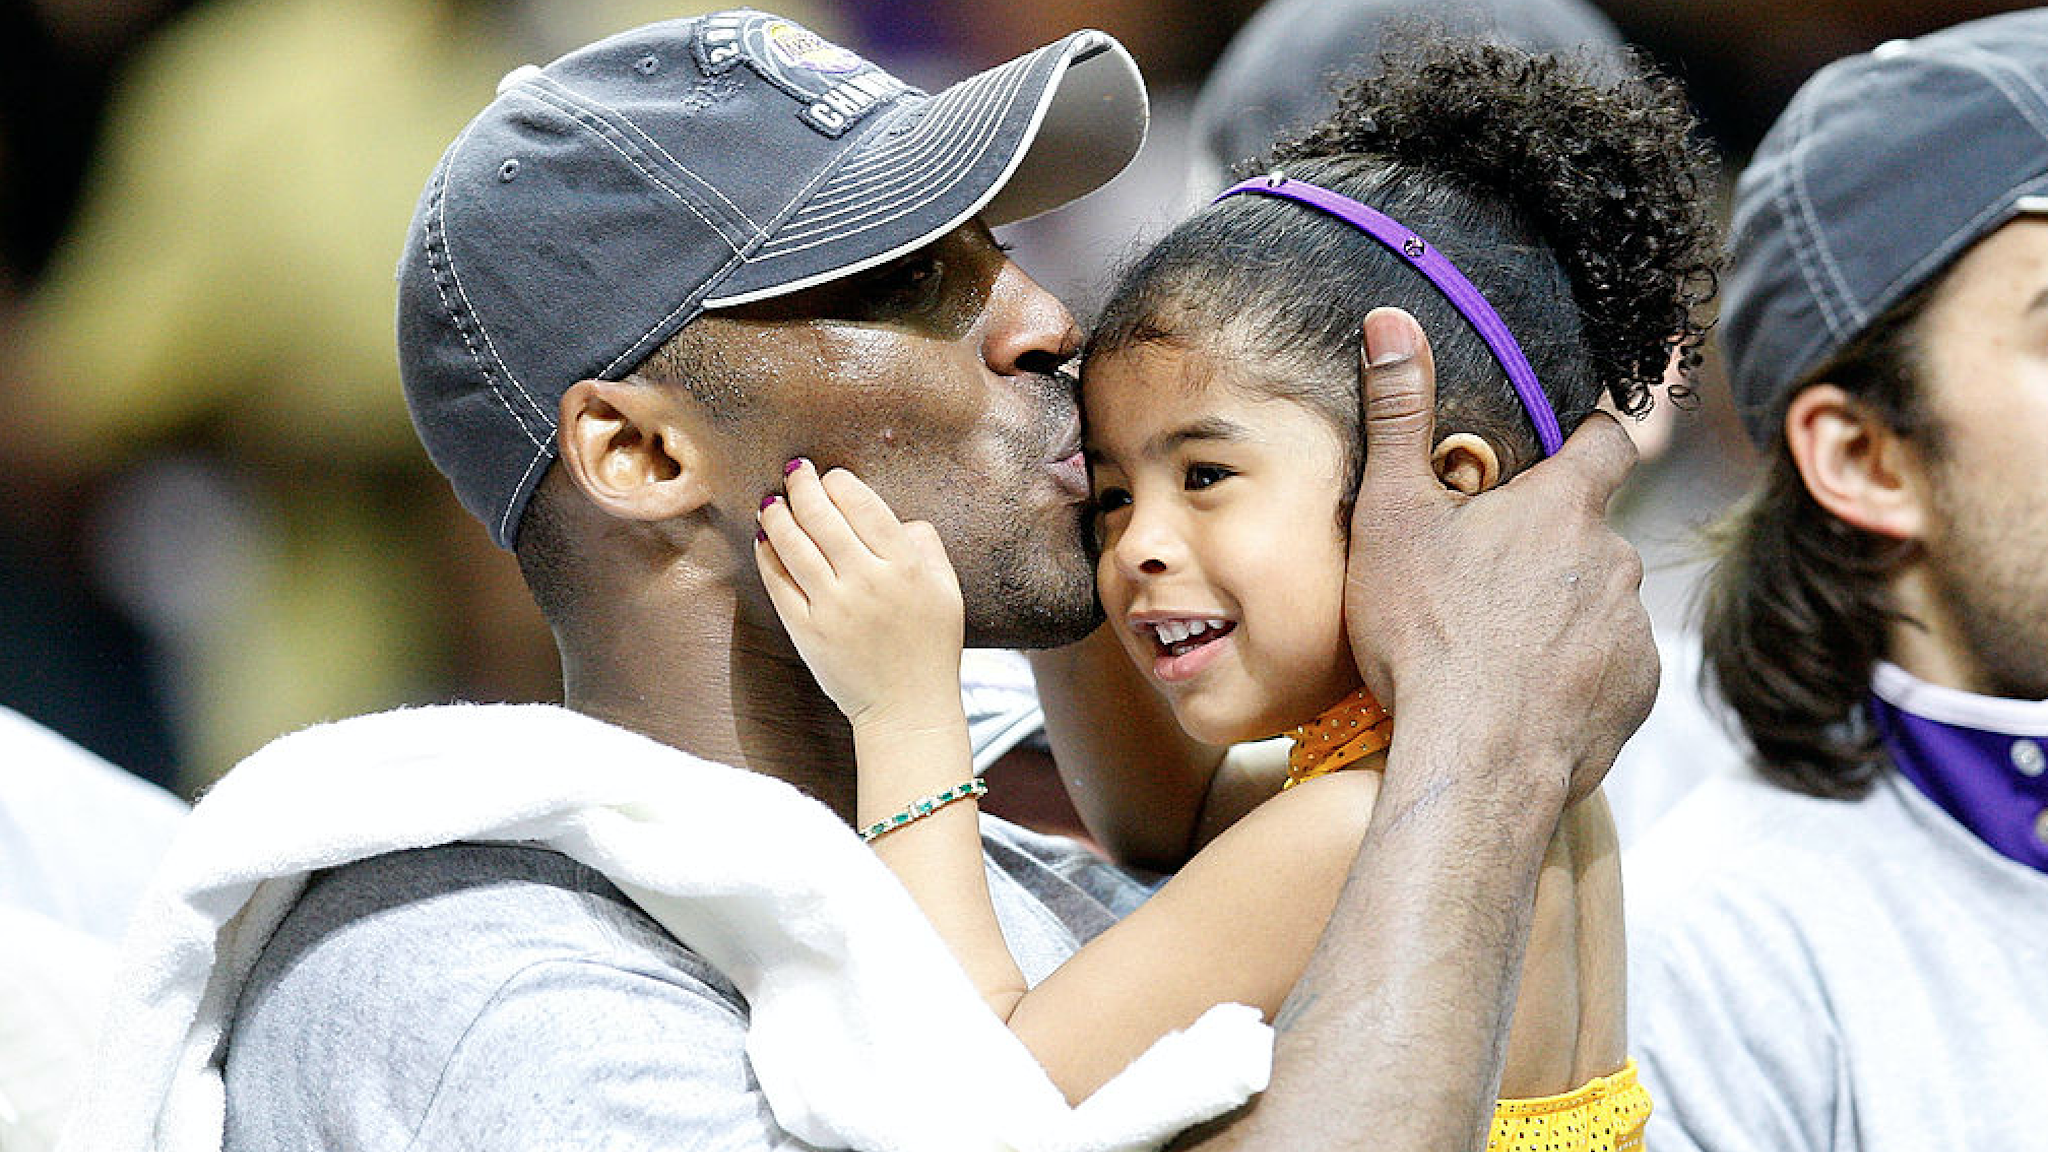 Kobe Bryant #24 of the Los Angeles Lakers kisses his daughter, Gianna, after the Lakers defeated the Orlando Magic 99-86 in Game Five of the 2009 NBA Finals on June 14, 2009 at Amway Arena in Orlando, Florida.